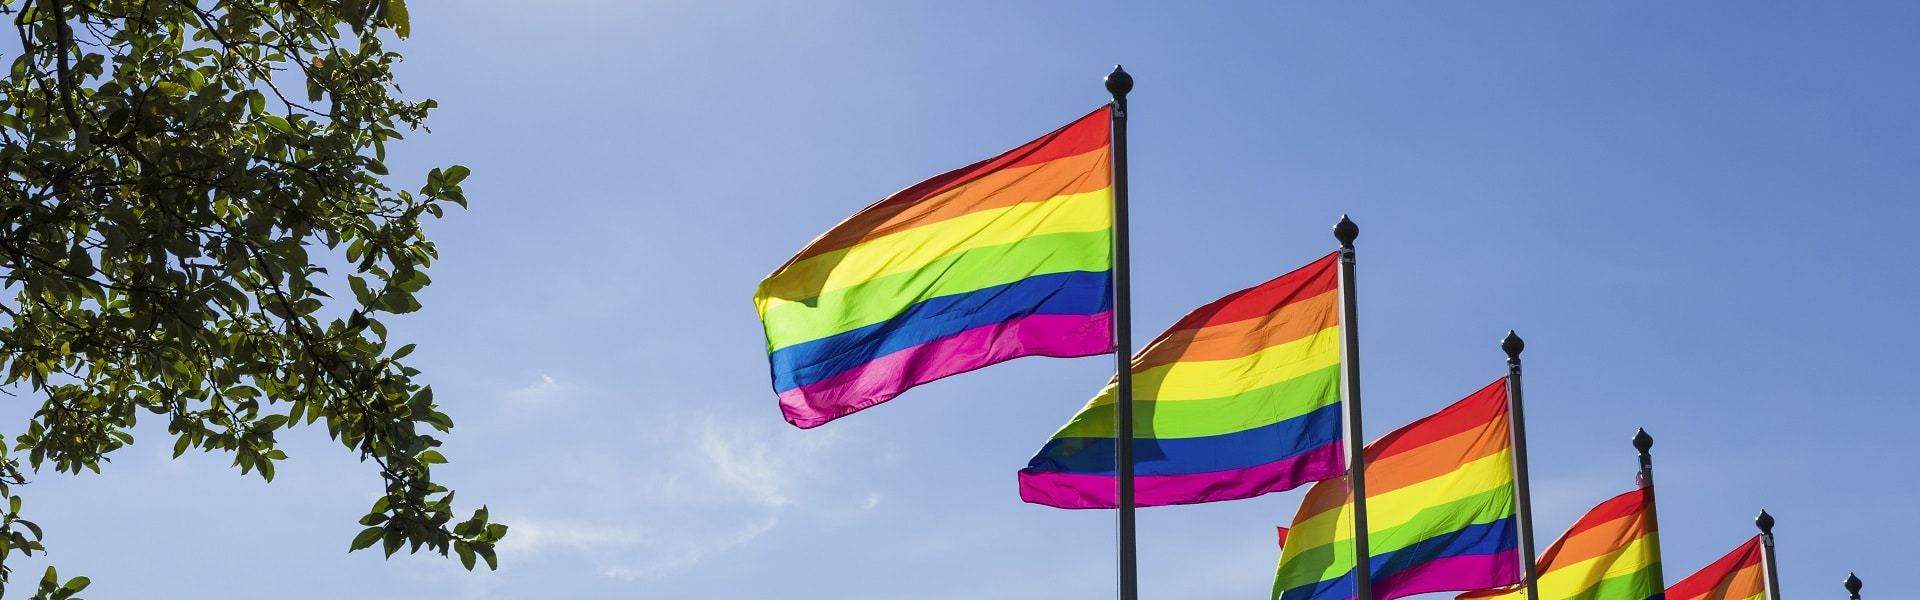 Pride@SAP: Why We’re Proud To Shout About Diversity And Inclusion